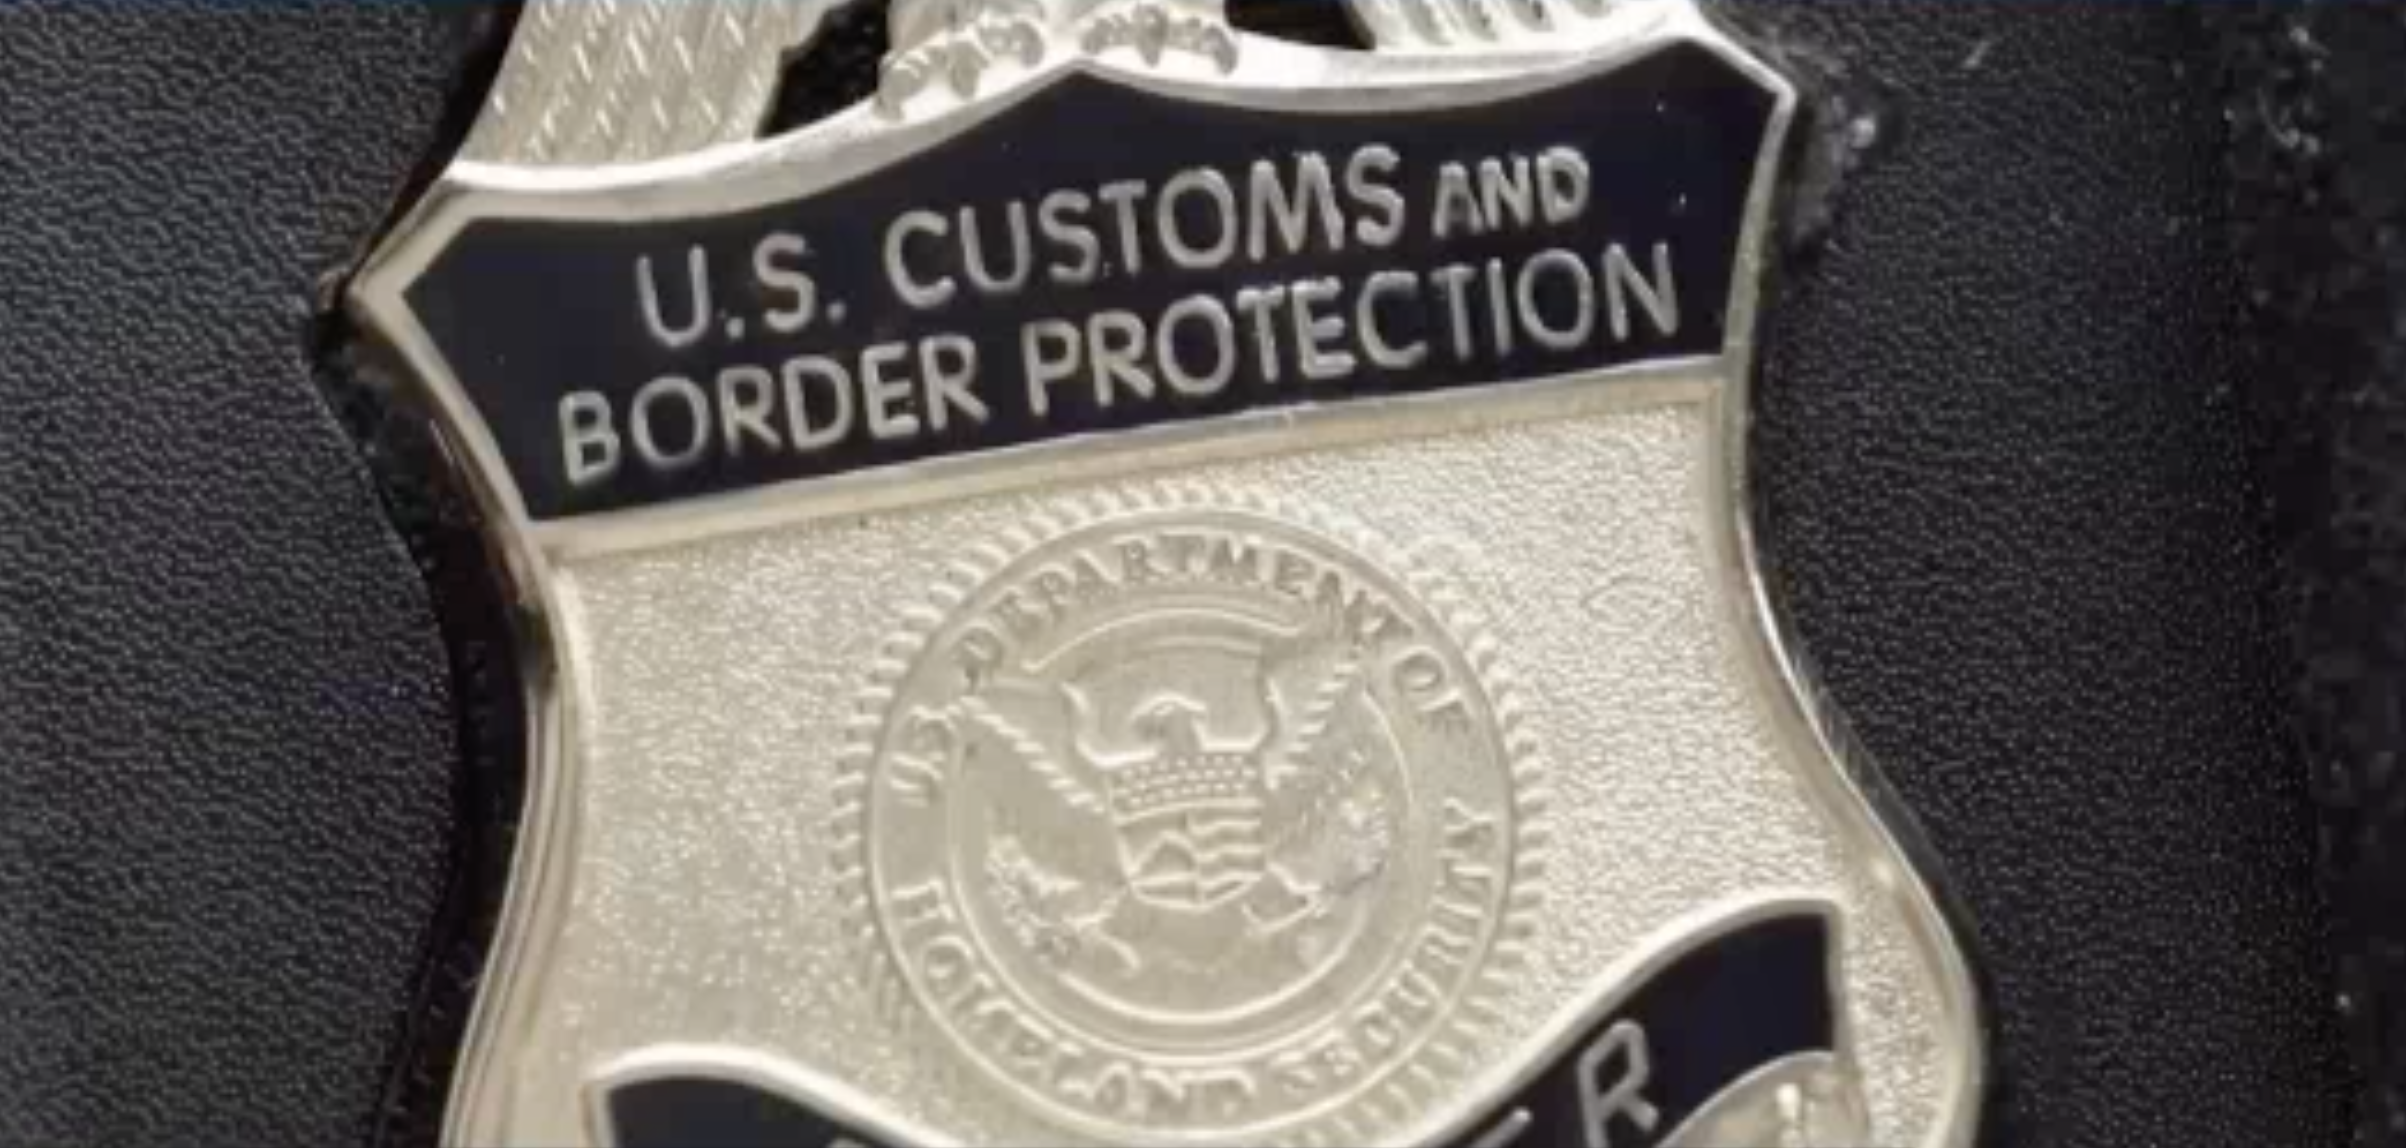 United States Customs and Border Protection Agency Newark Airport